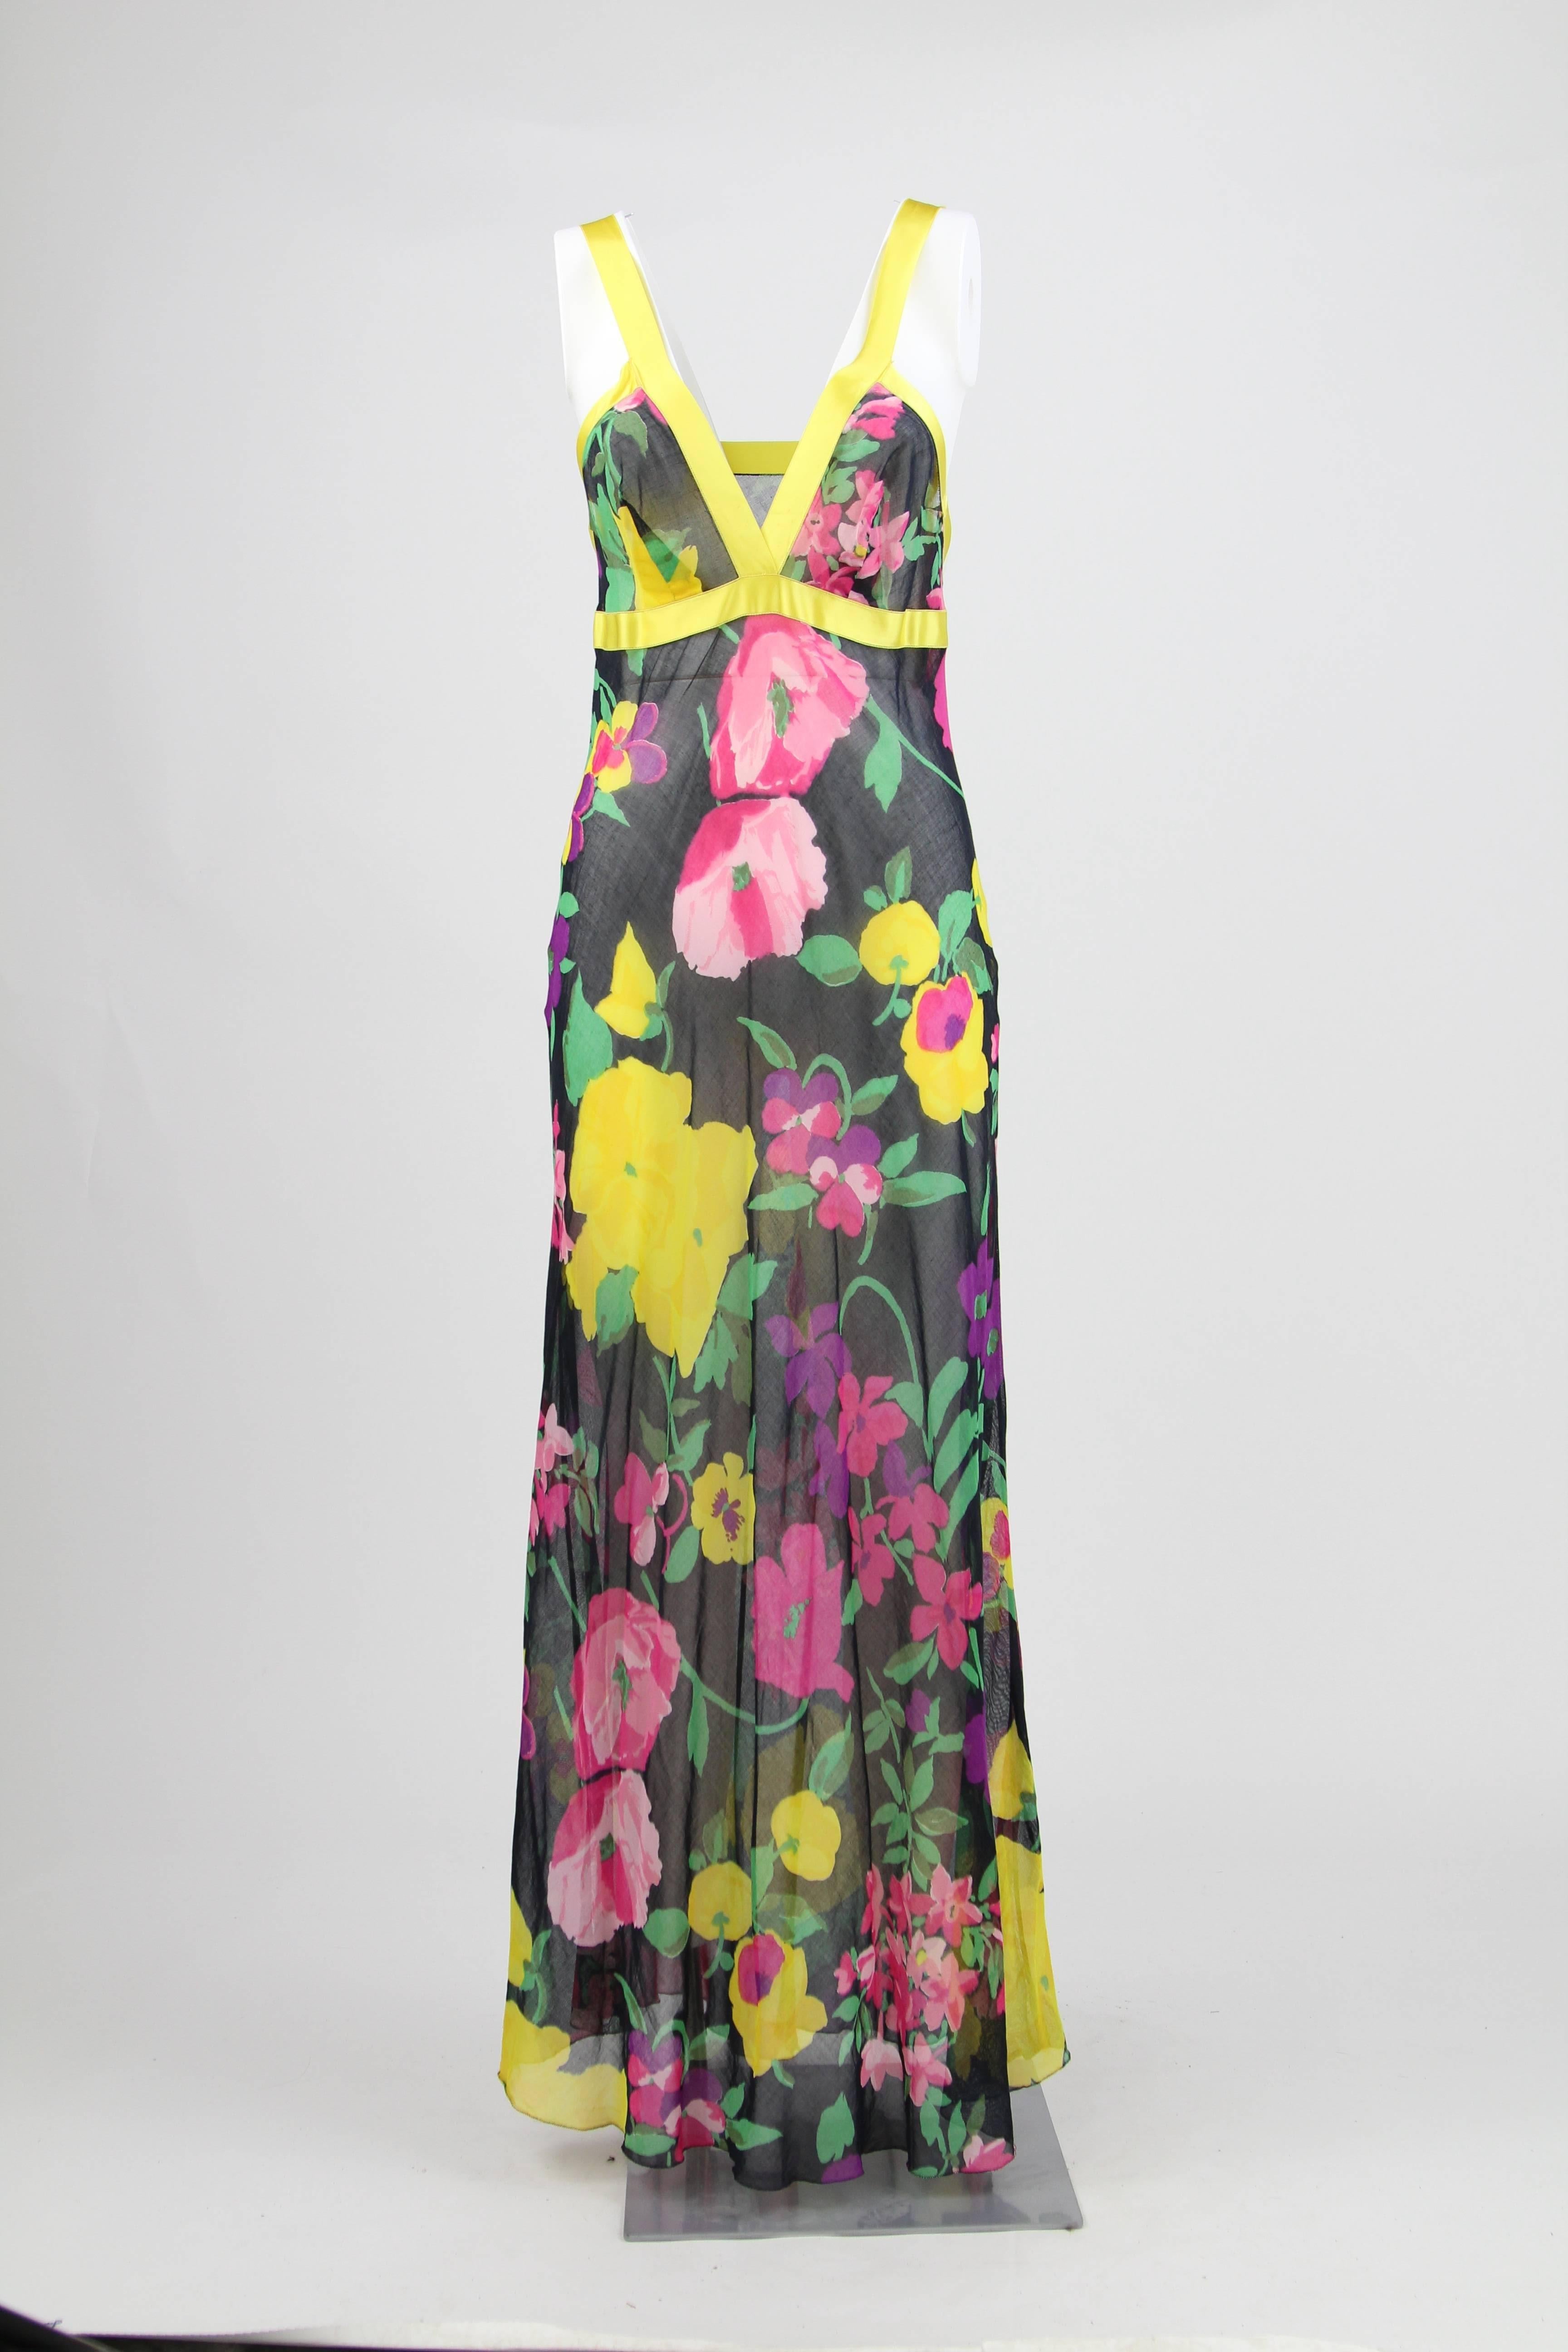 Delicate tailored sleeveless see-through dress in black color with a multicolor flower pattern and yellow silk hems. It features a high waist, underline by a silk band, and comes with a wrap-around sleeved surcoat with the same pattern. No fastens.